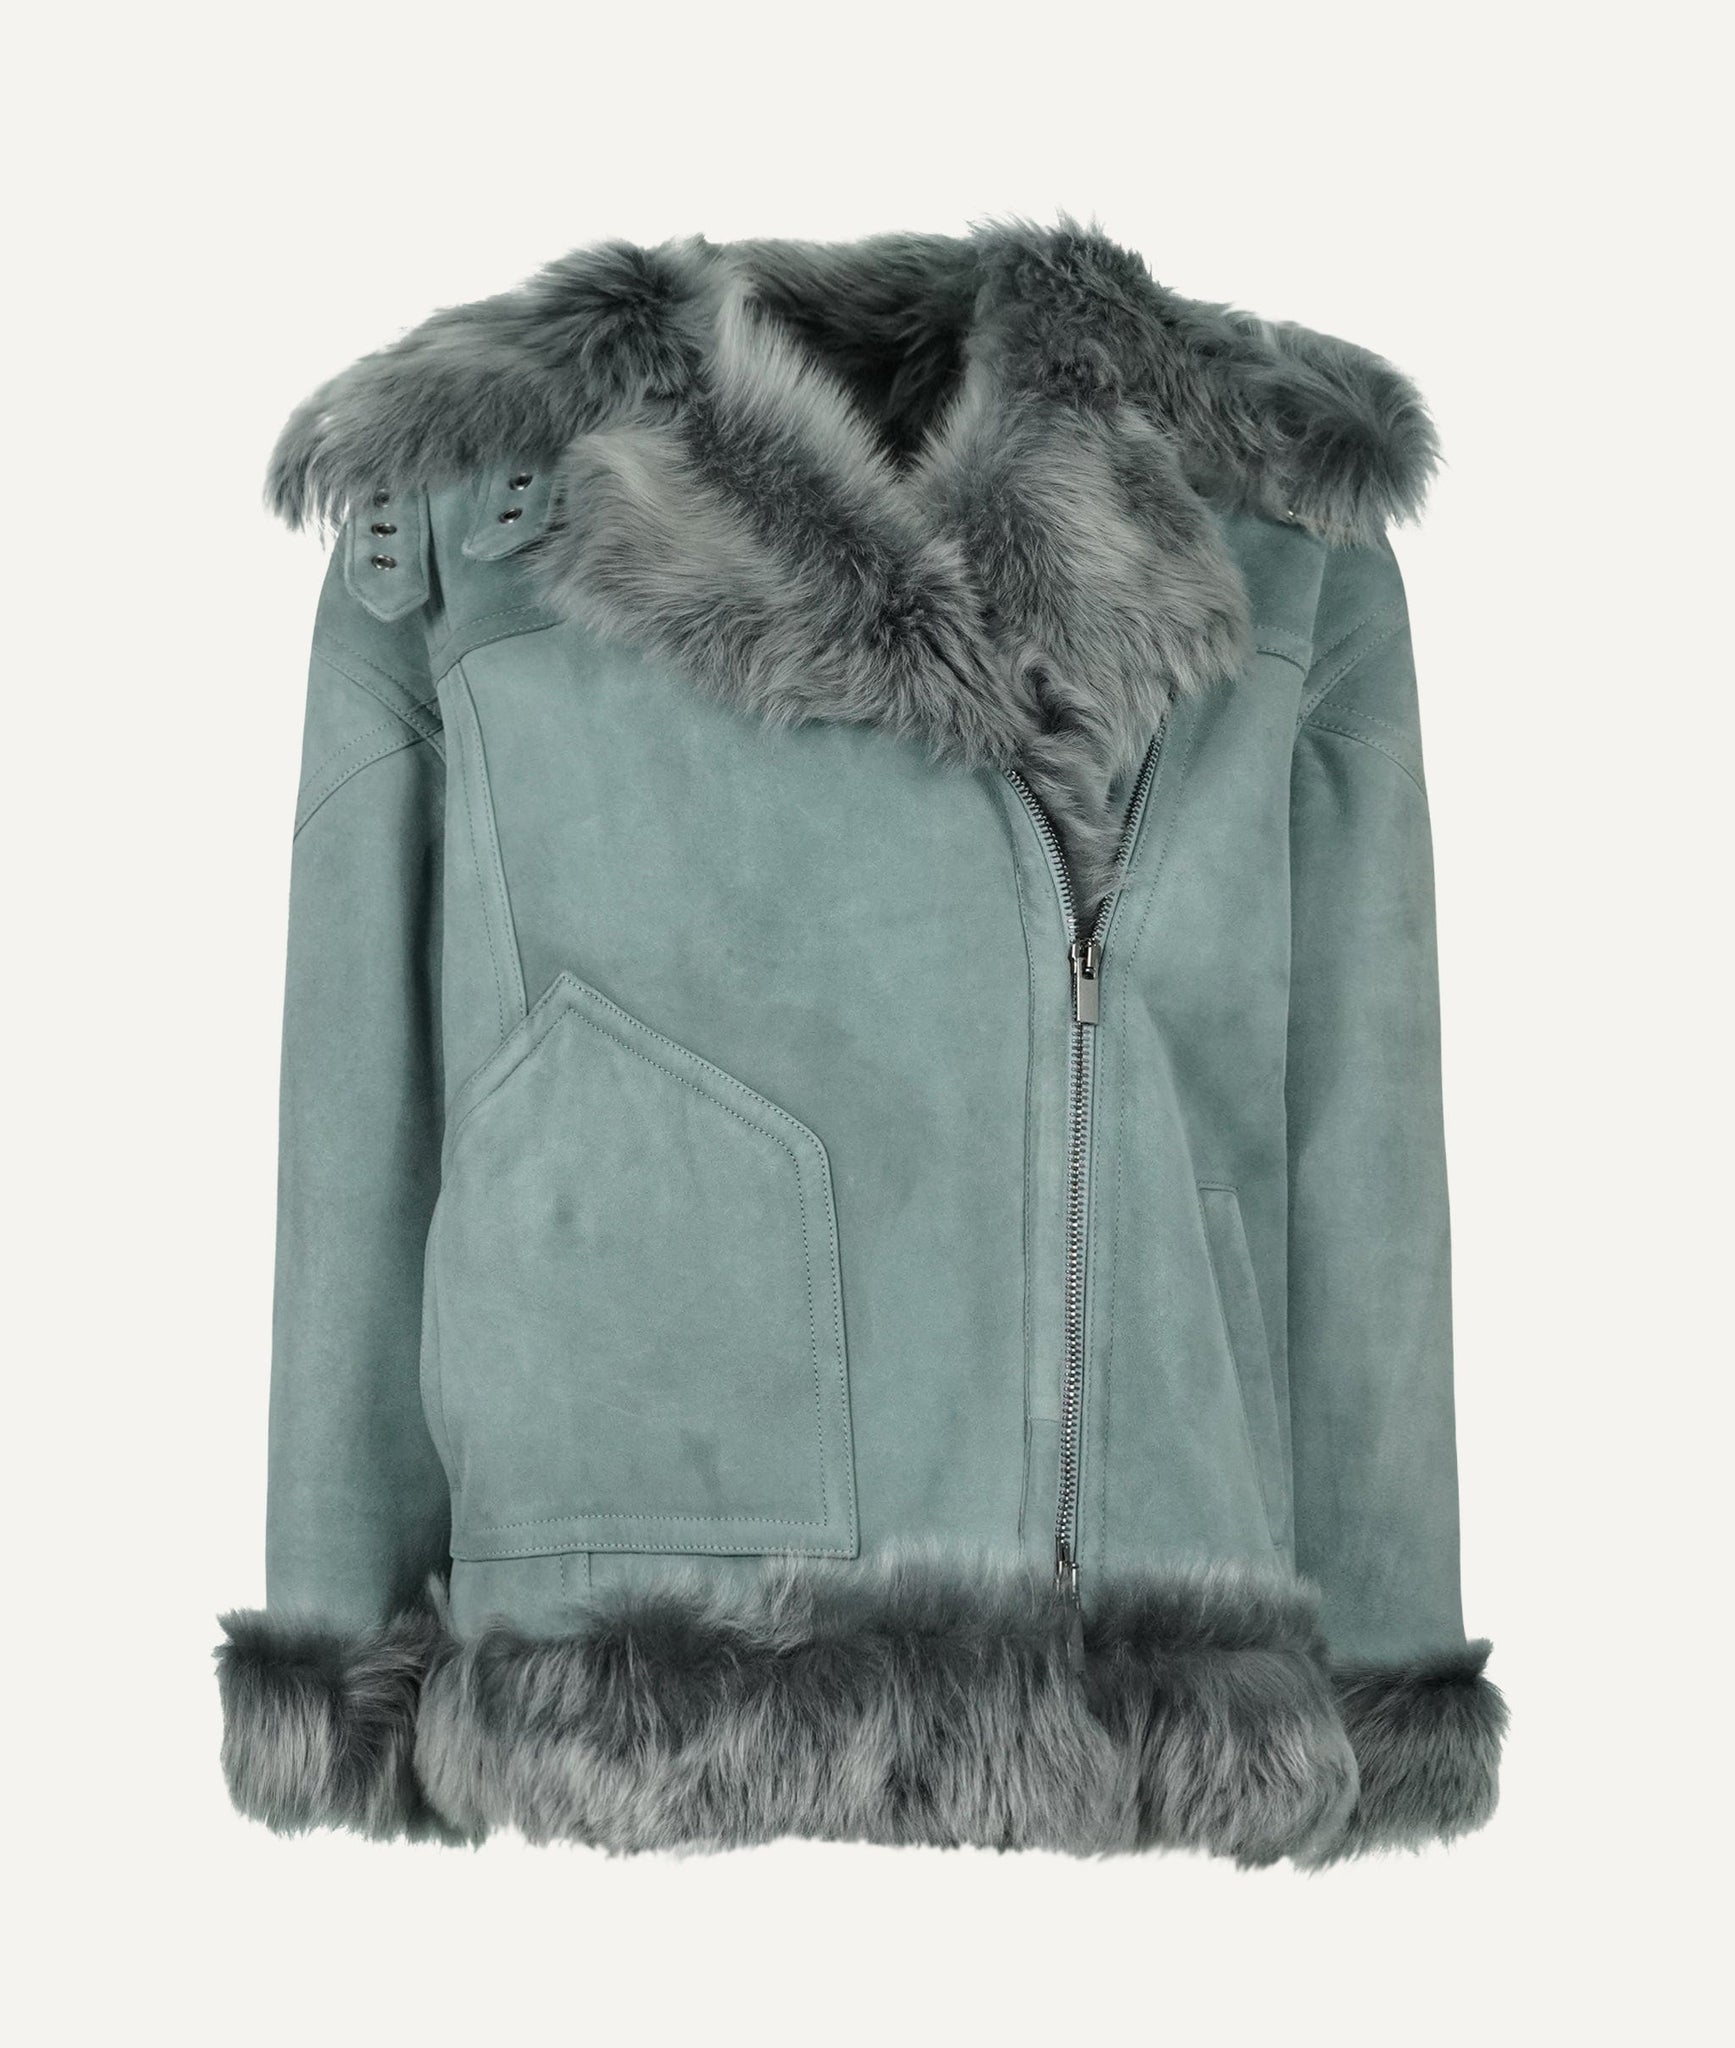 Eleventy - Double Breasted Coat with Shearling in Lambskin